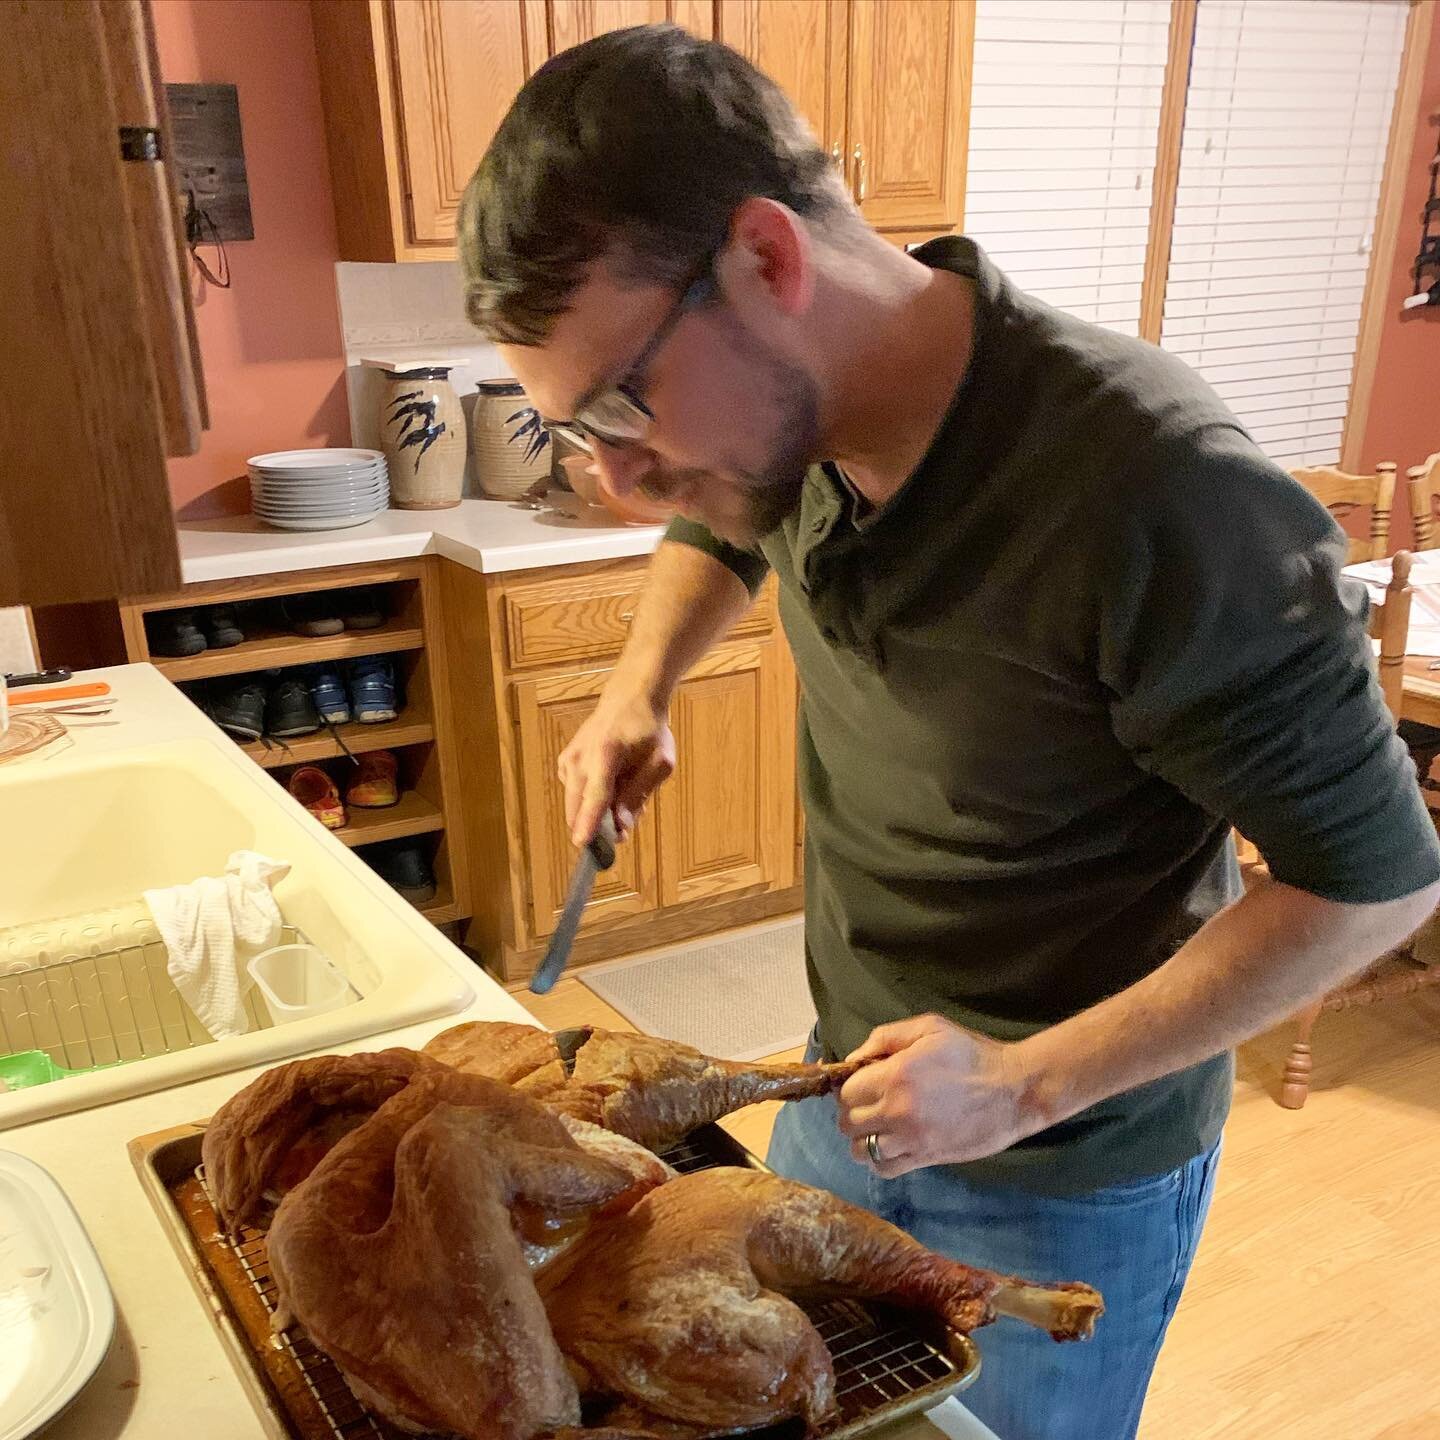 Our Thanksgiving featured last years turkey and it was delicious! We had a wonderful day yesterday. Got home today and packed eggs. Addie only cracked one. 😅Tomorrow is small business Saturday. If you want to support us you could commit to a CSA for